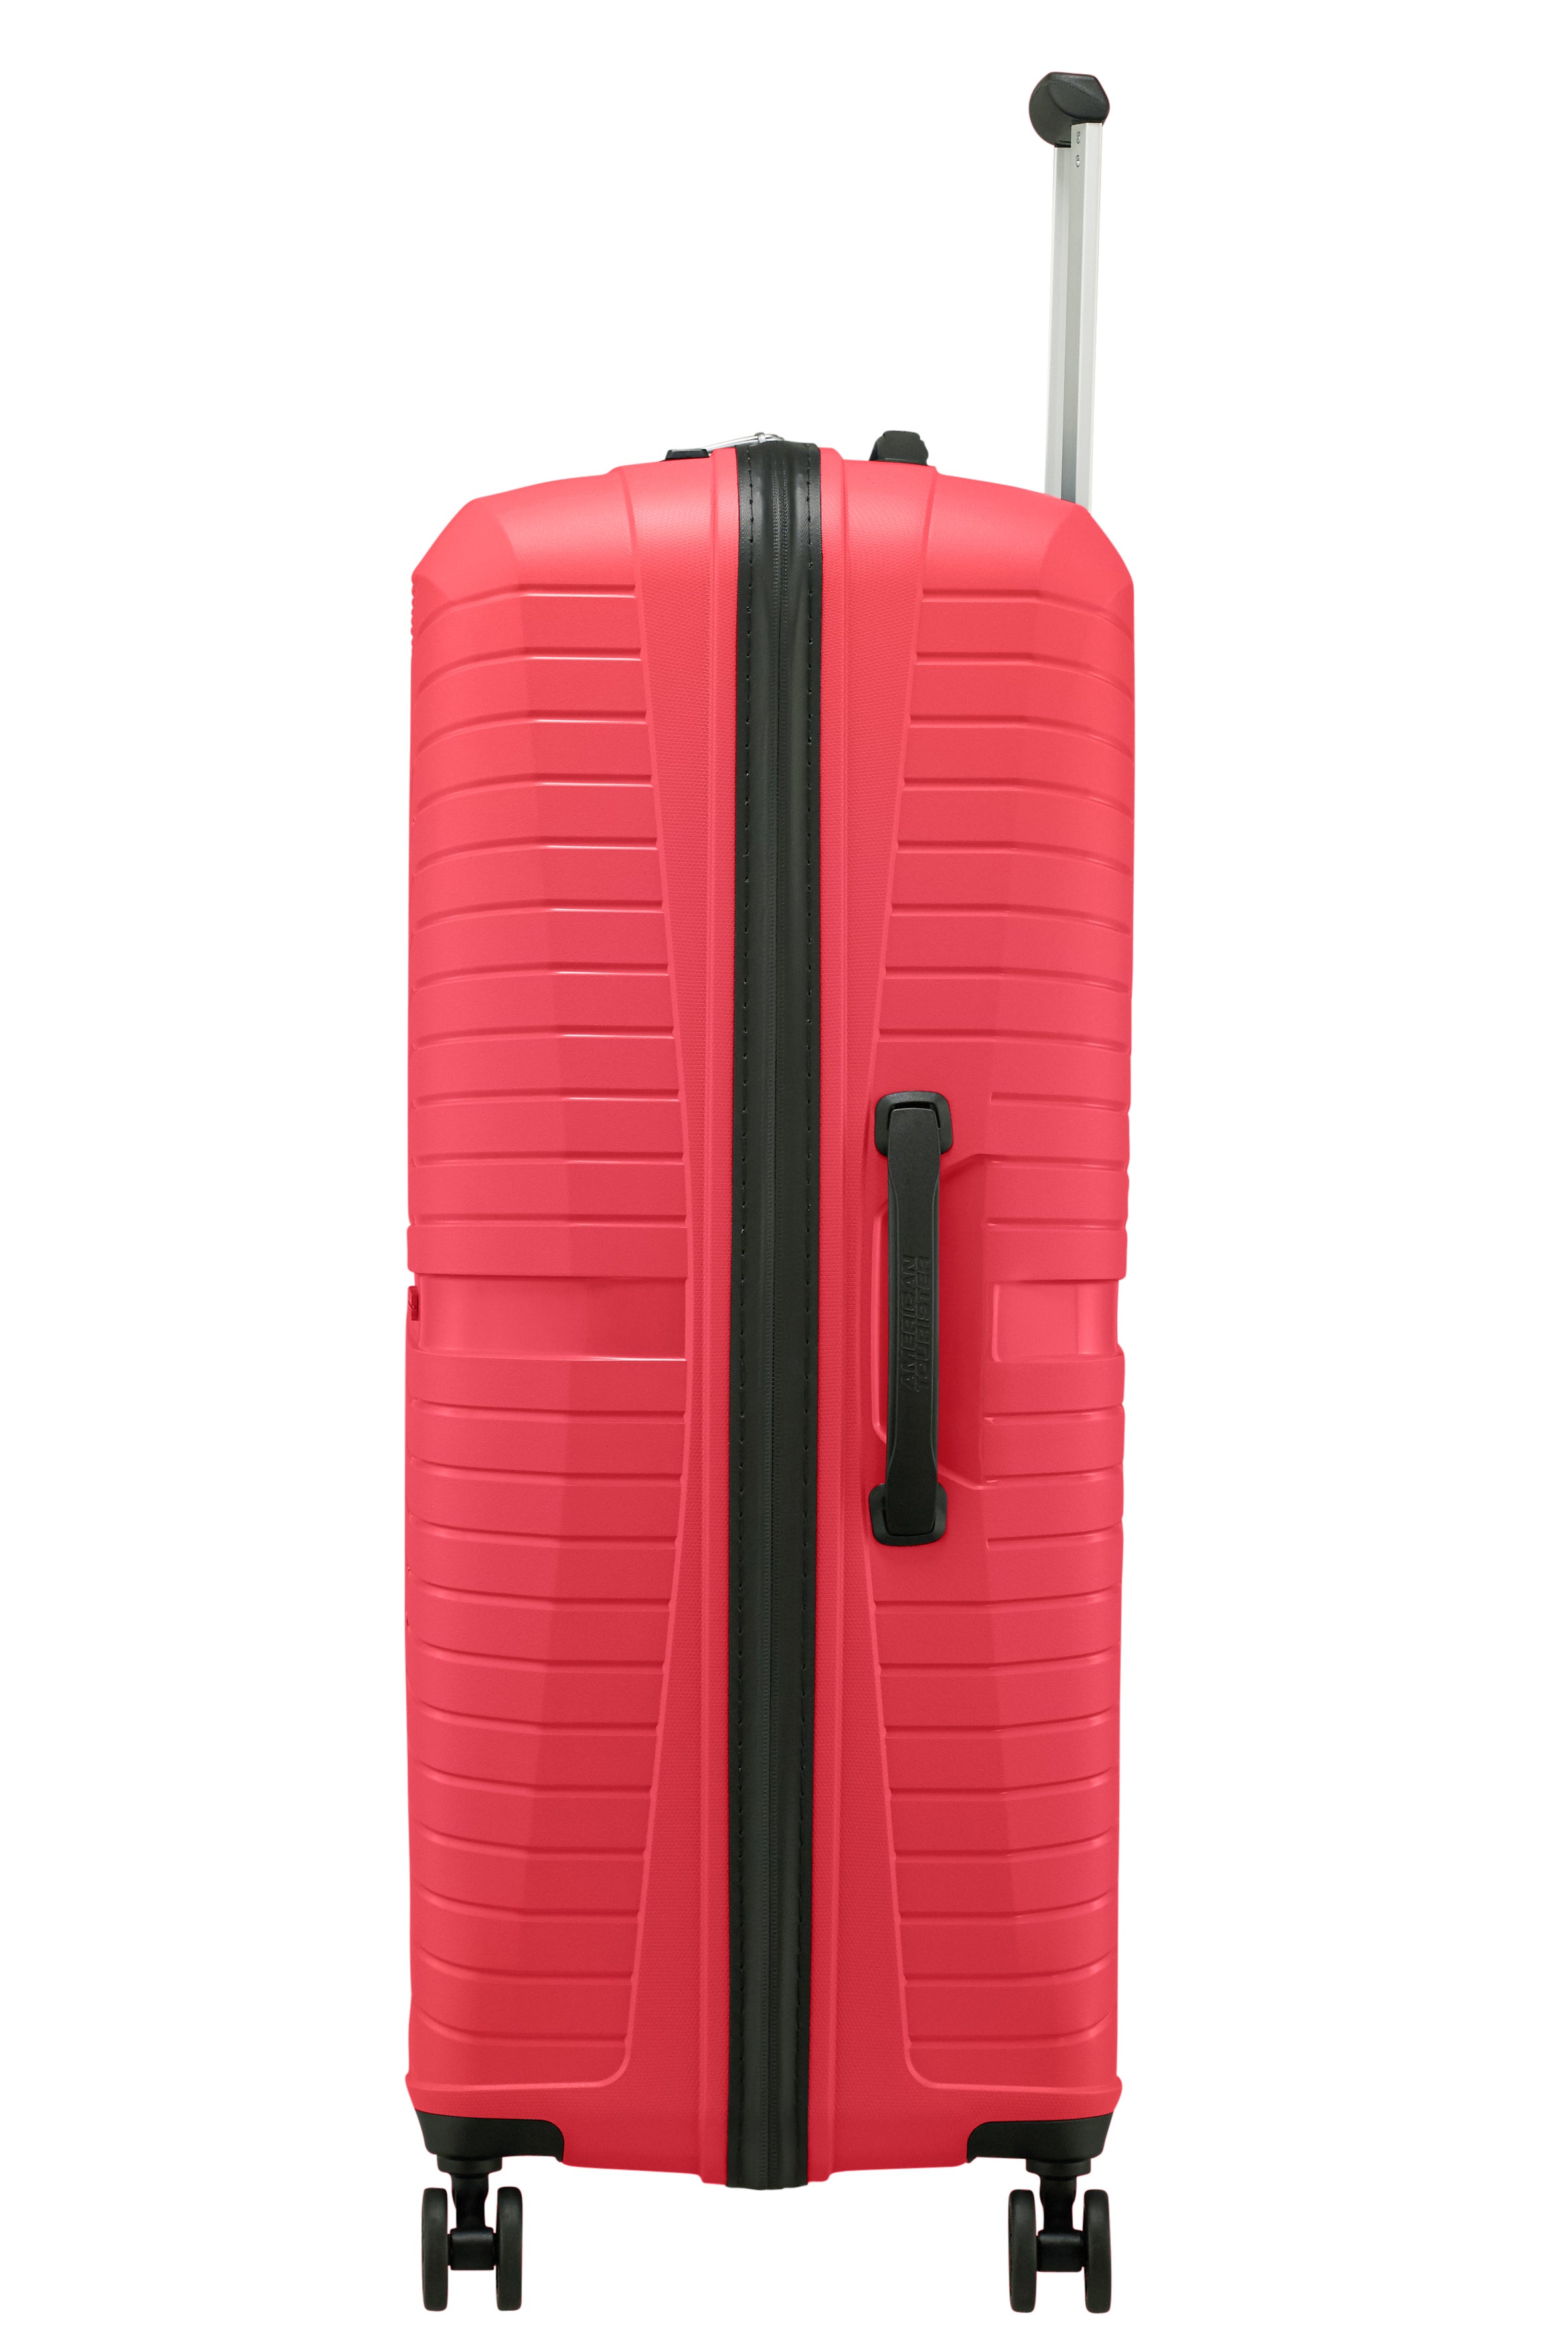 American Tourister - Airconic 77cm Large 4 Wheel Hard Suitcase - Paradise Pink-2